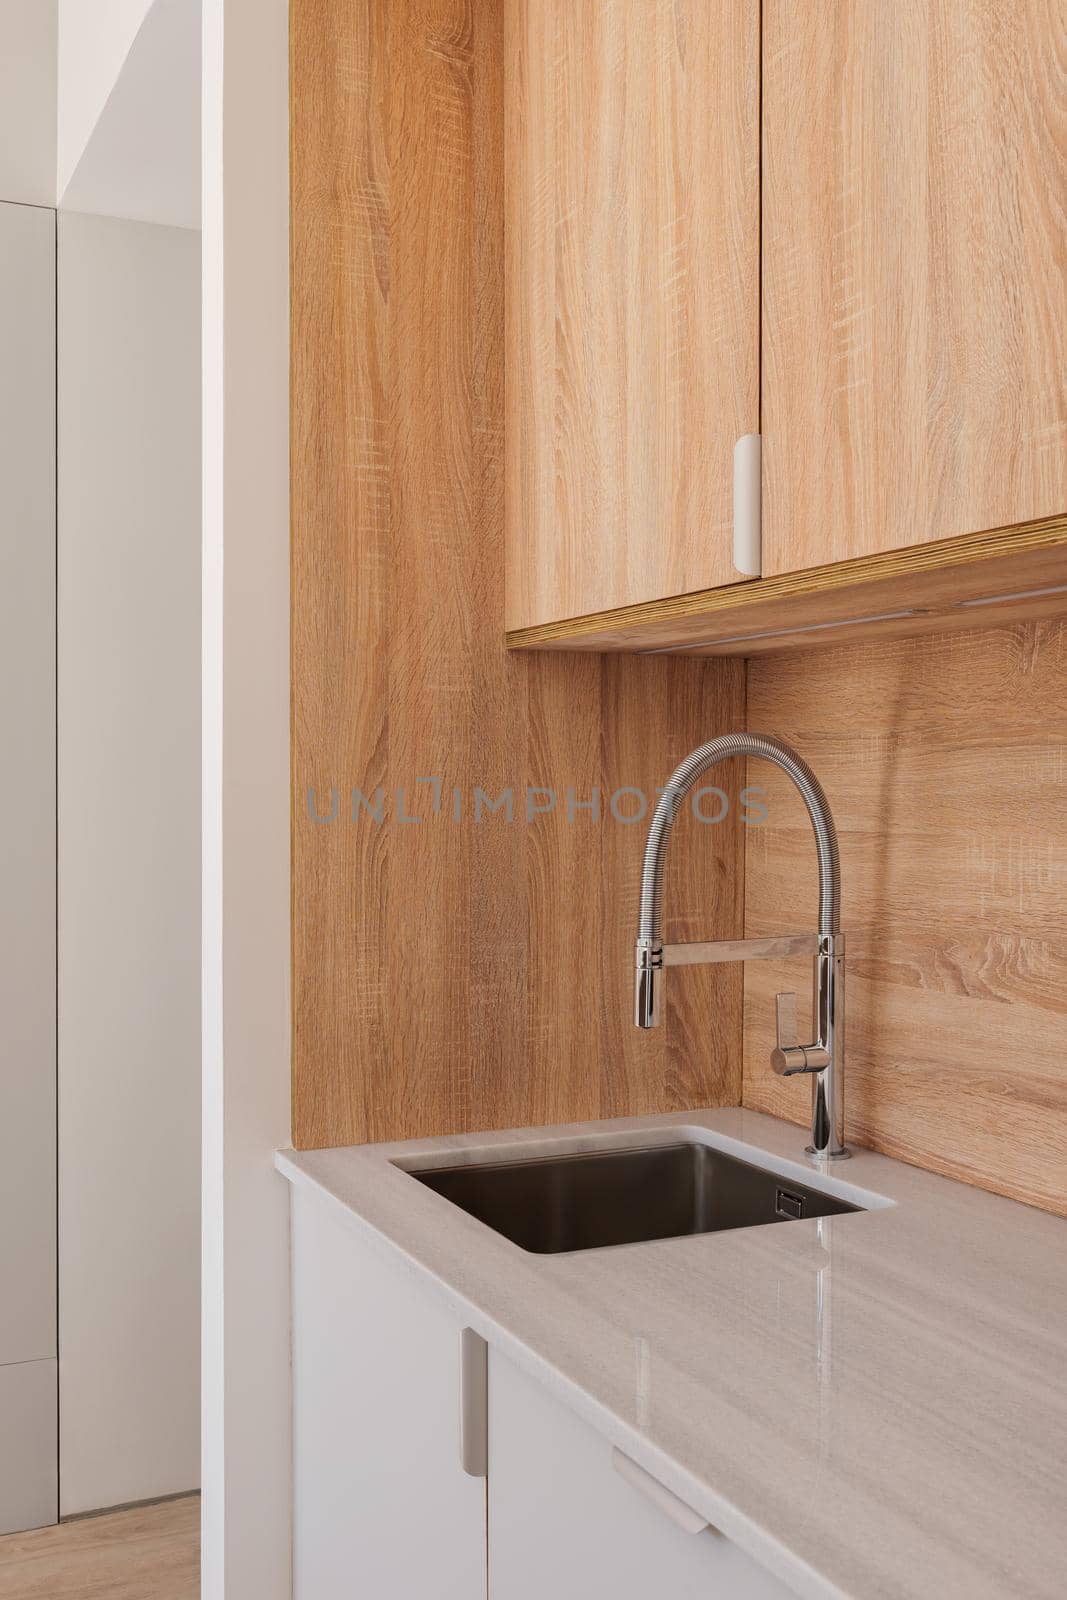 Modern faucet and sink in elegant kitchen with wooden cabinets. Minimalist style interior in refurbished apartment